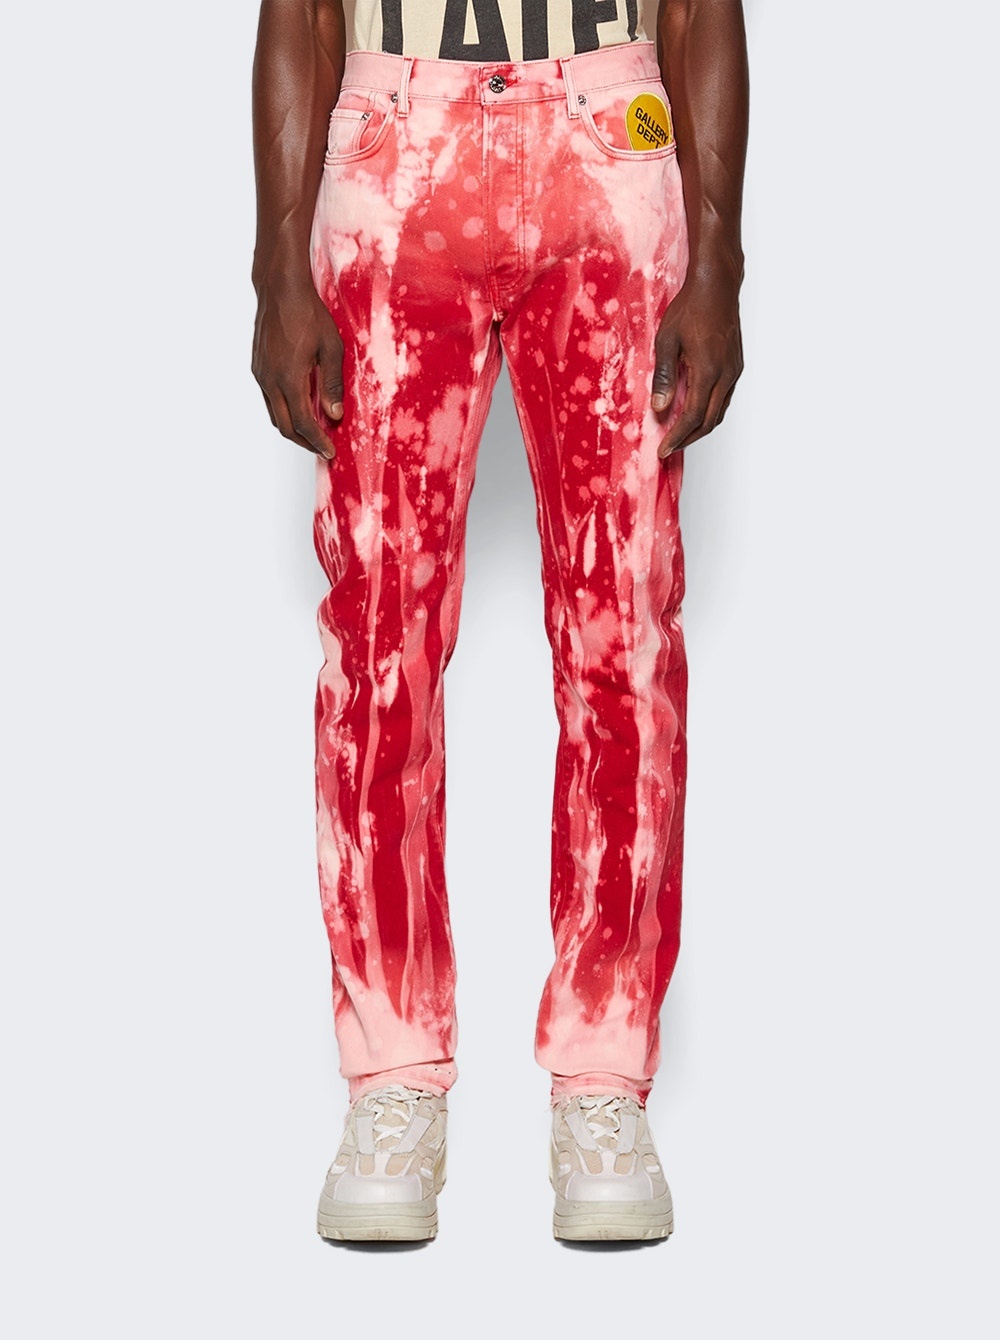 Biscayne Jeans Red Tie Dye - 3